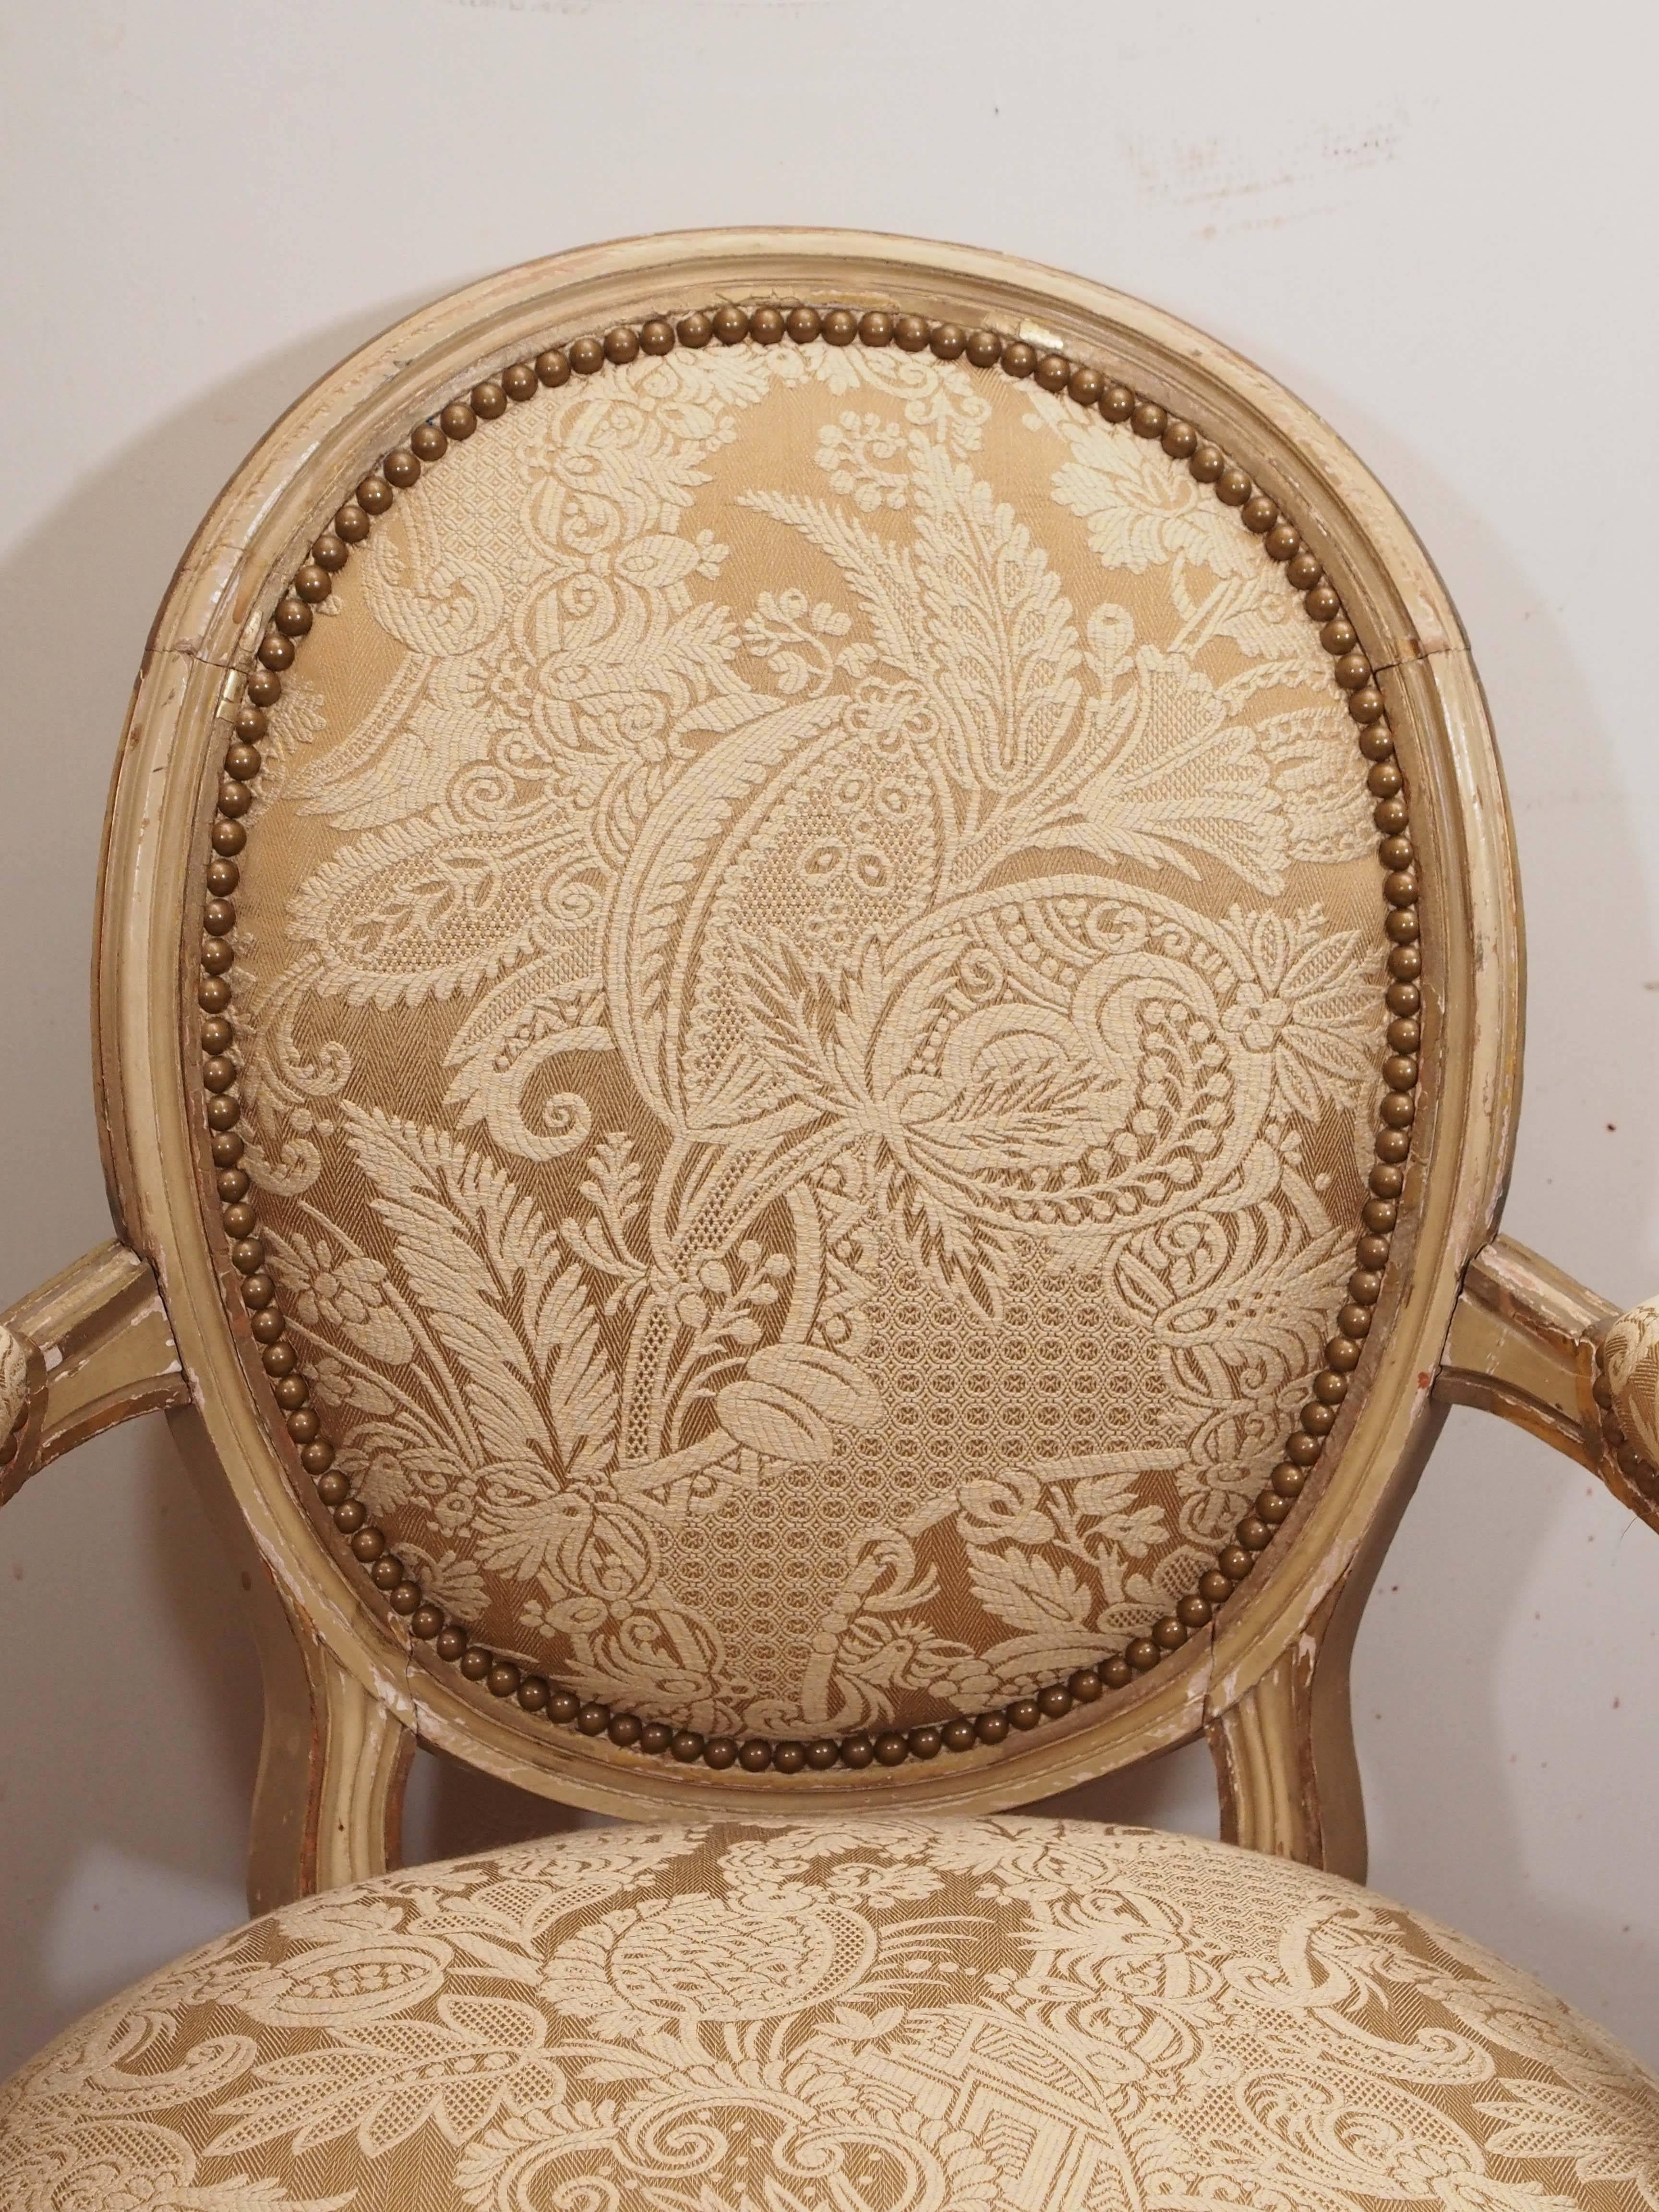 Pair of period Louis XVI oval backed armchairs with pegged construction and parcel gilt finish.